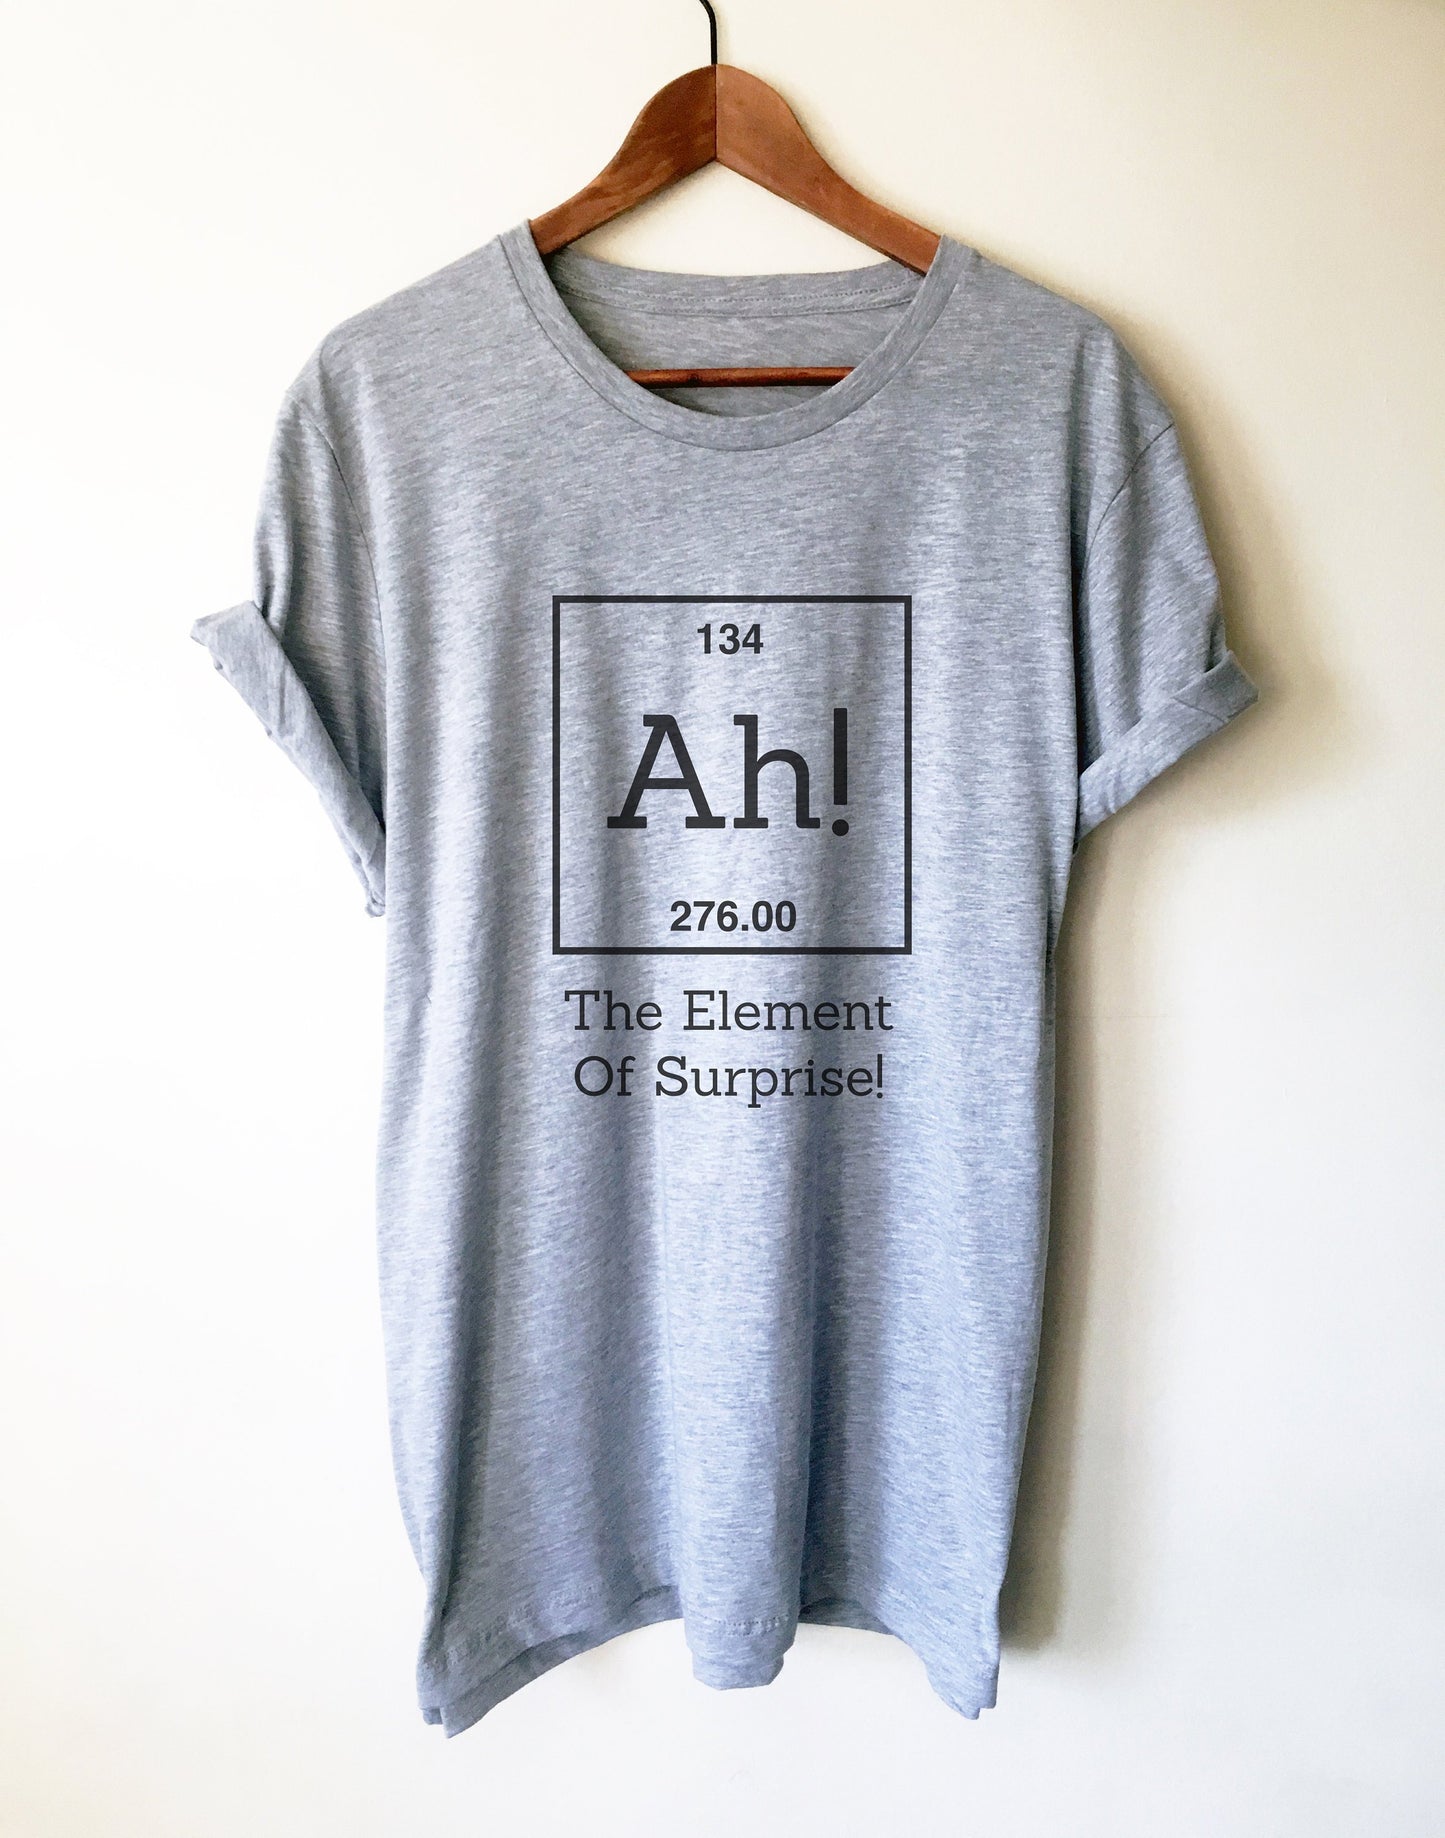 Funny Chemistry Pun Unisex Shirt - Ah The Element of Surprise - Periodic Table Shirt, Chemistry Shirt, Science Shirt, Funny Chemistry Gift